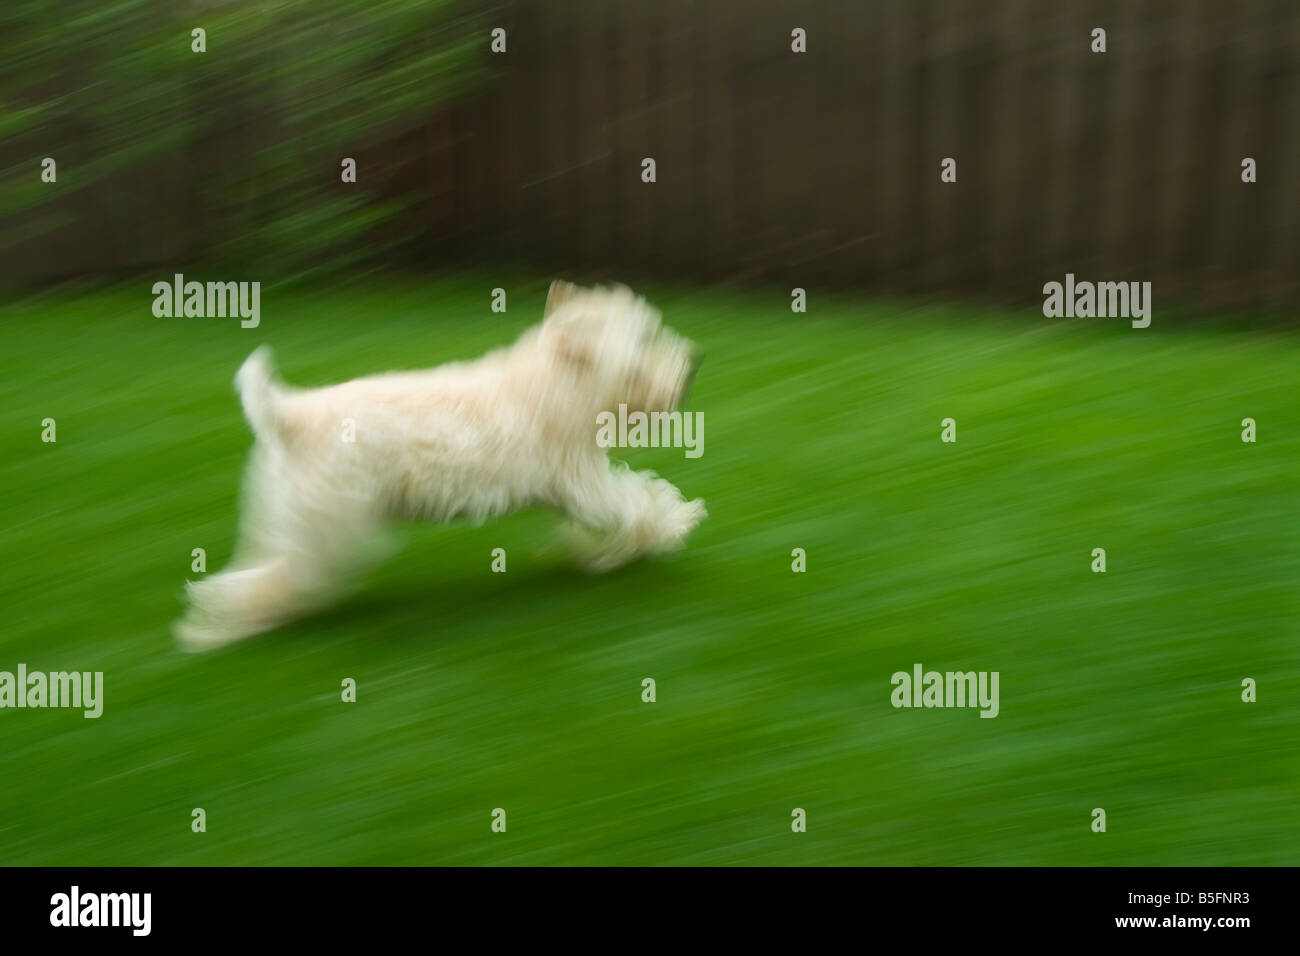 Soft Coated Wheaten Terrier dog running and motion blurred Stock Photo